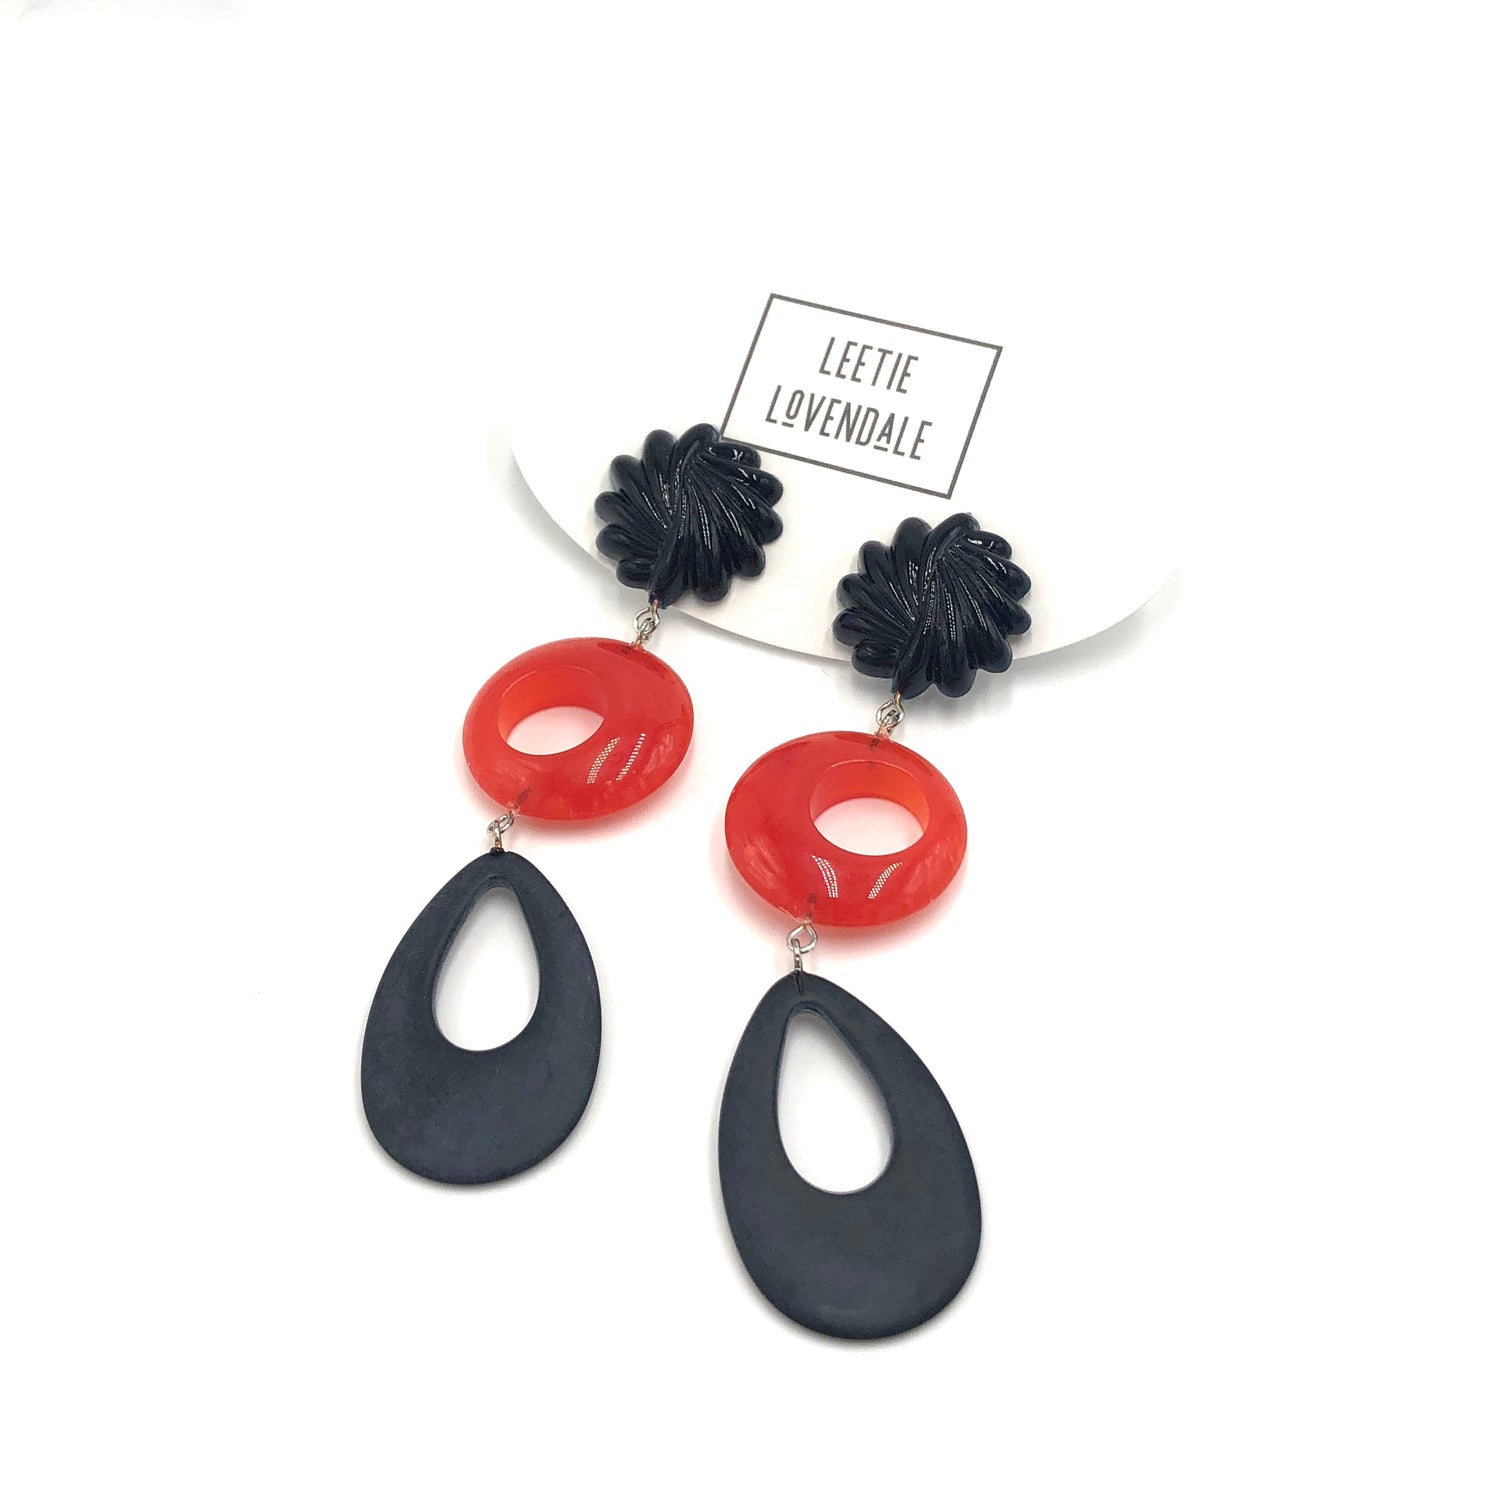 lucite statement earrings